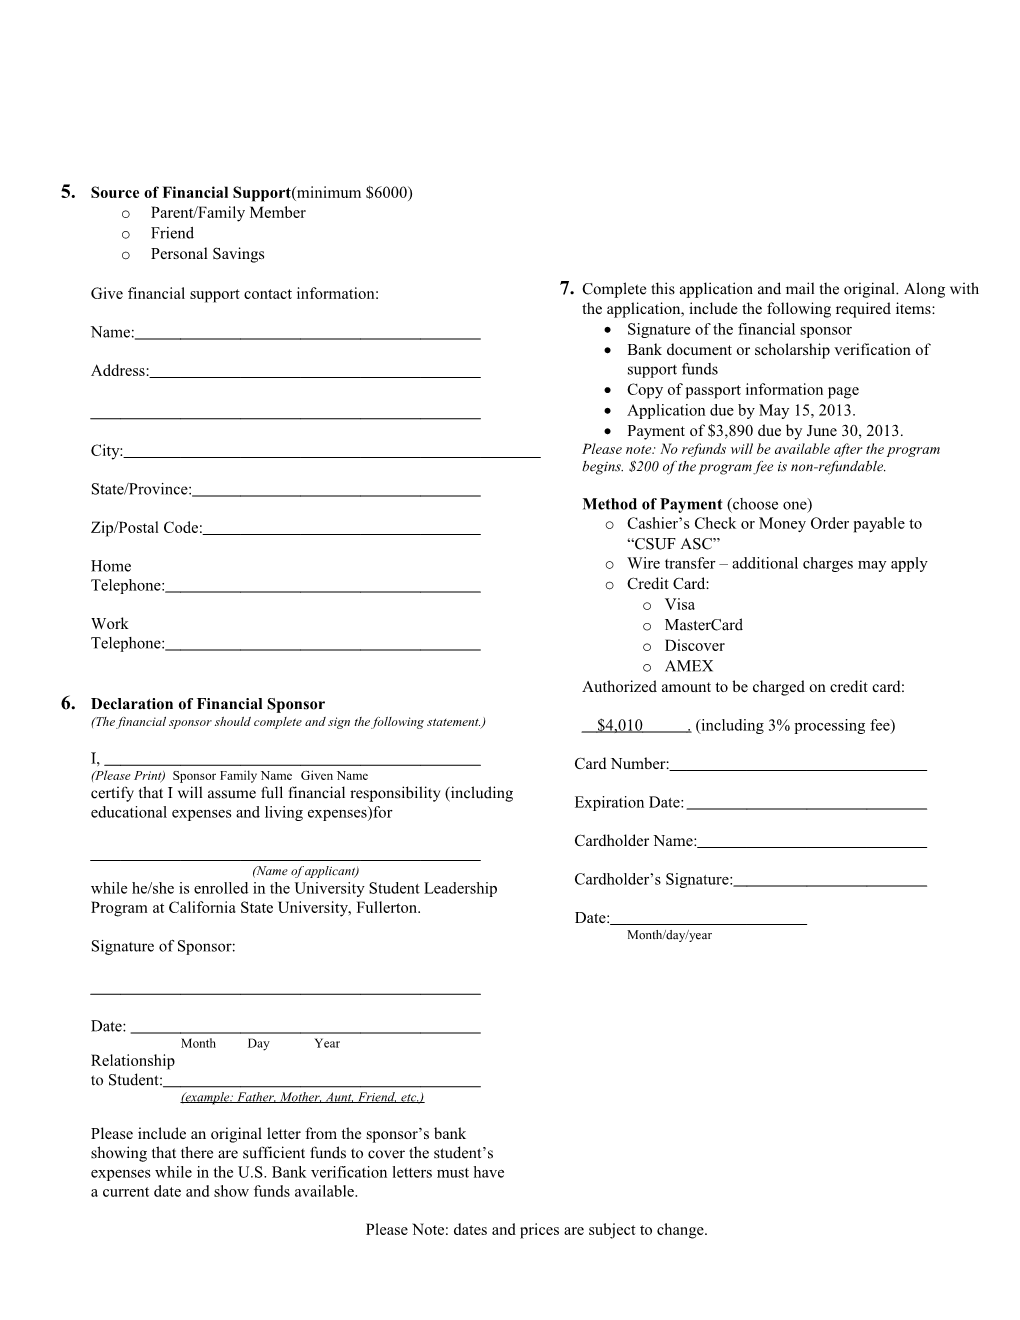 Application for Admission to Summer 2014